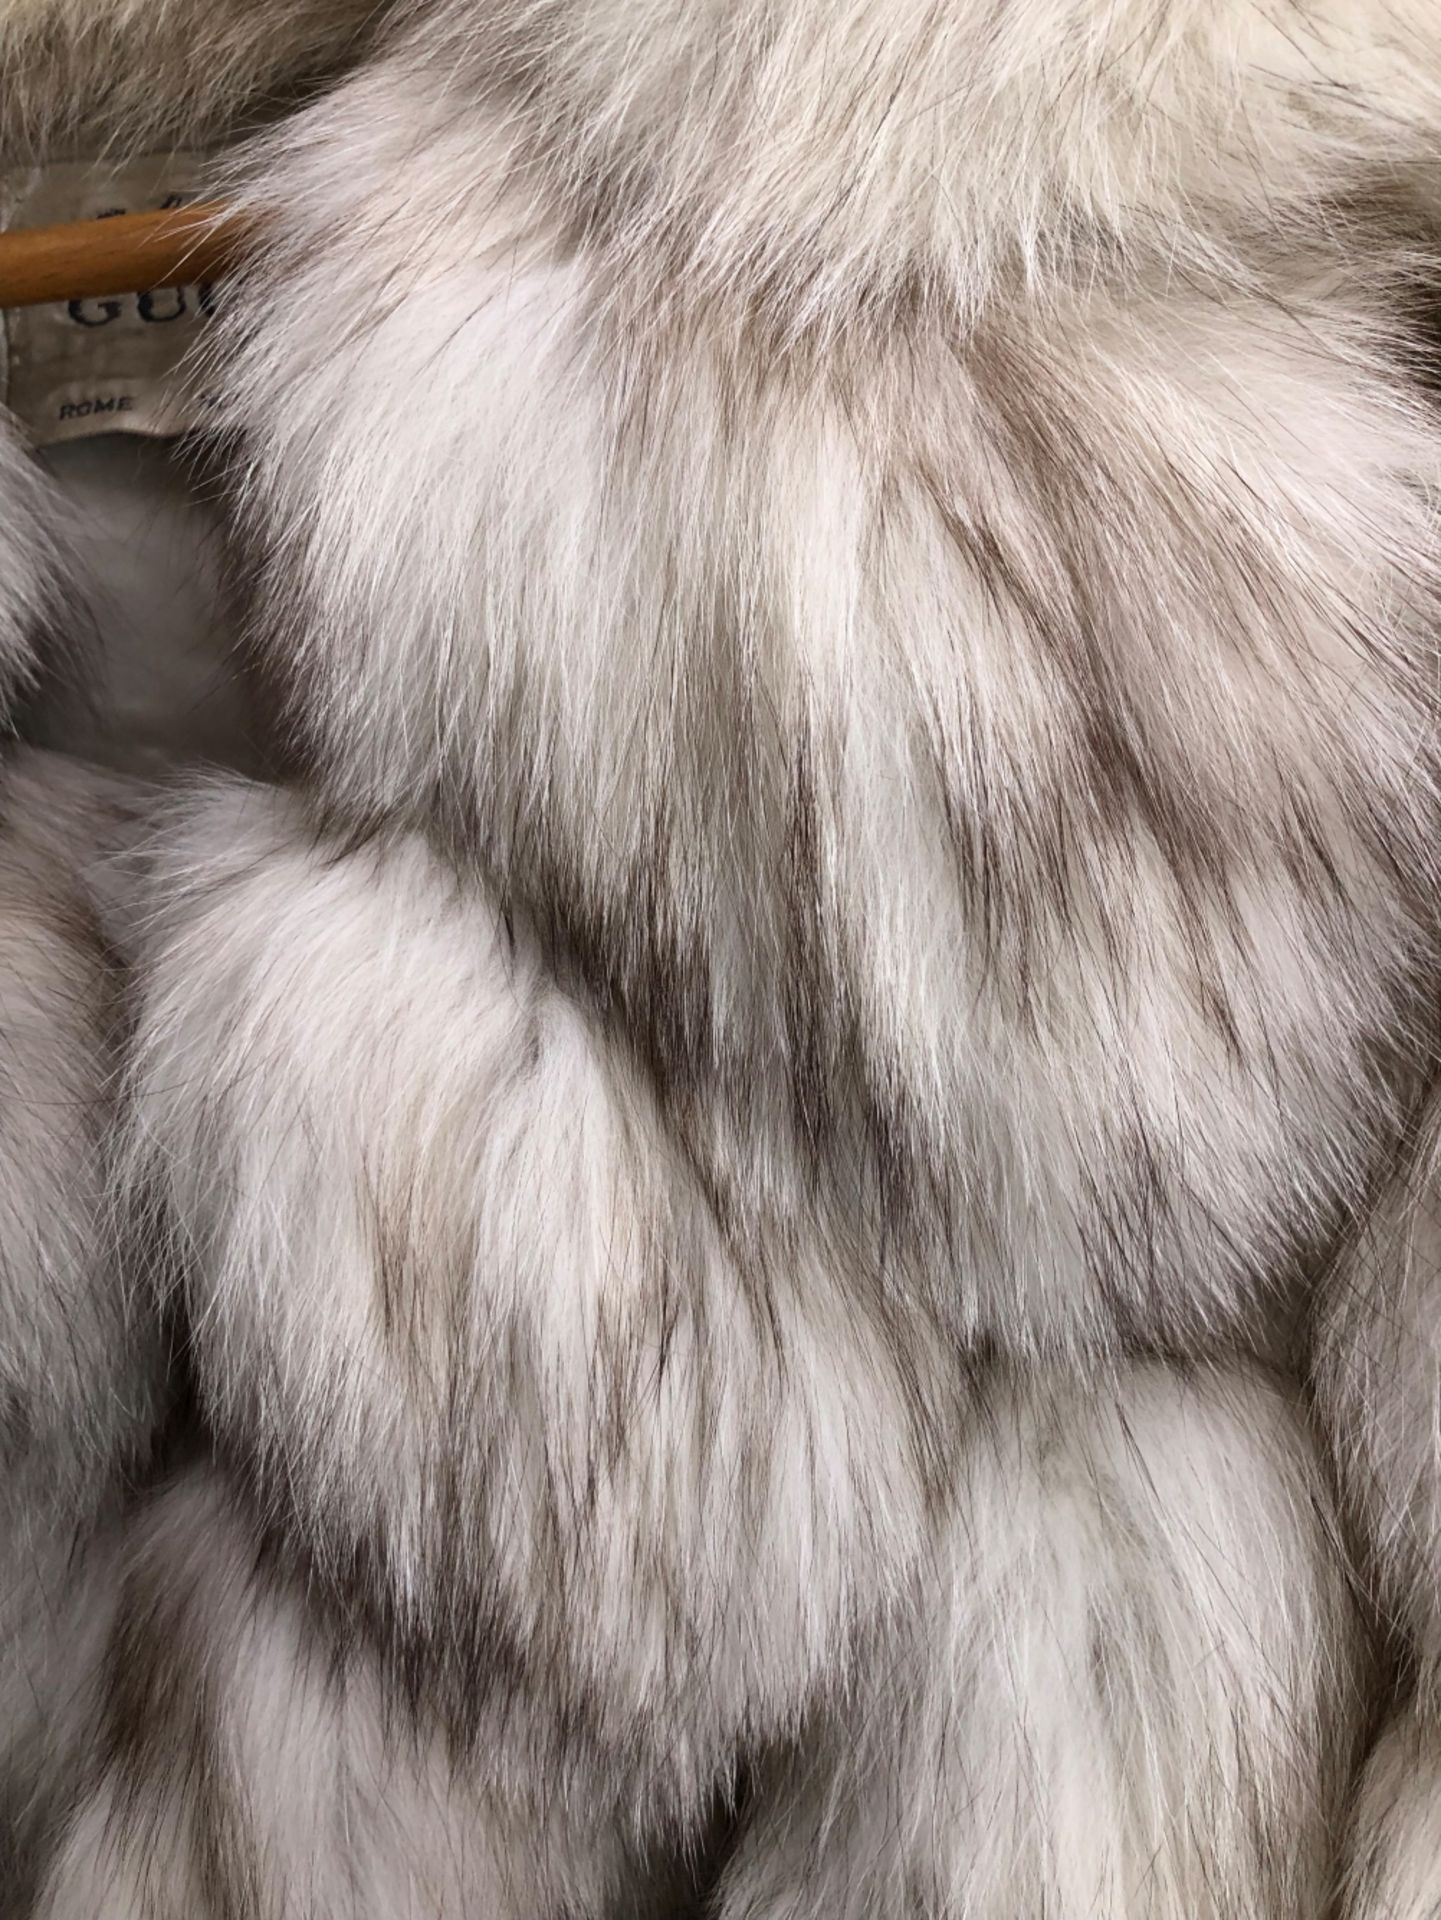 FUR COAT: EMILIO GUCCI, WHITE WITH HORIZONTAL GREY TINGED BANDS, WITH ZIPPED BAND TO ADJUST THE - Image 3 of 17